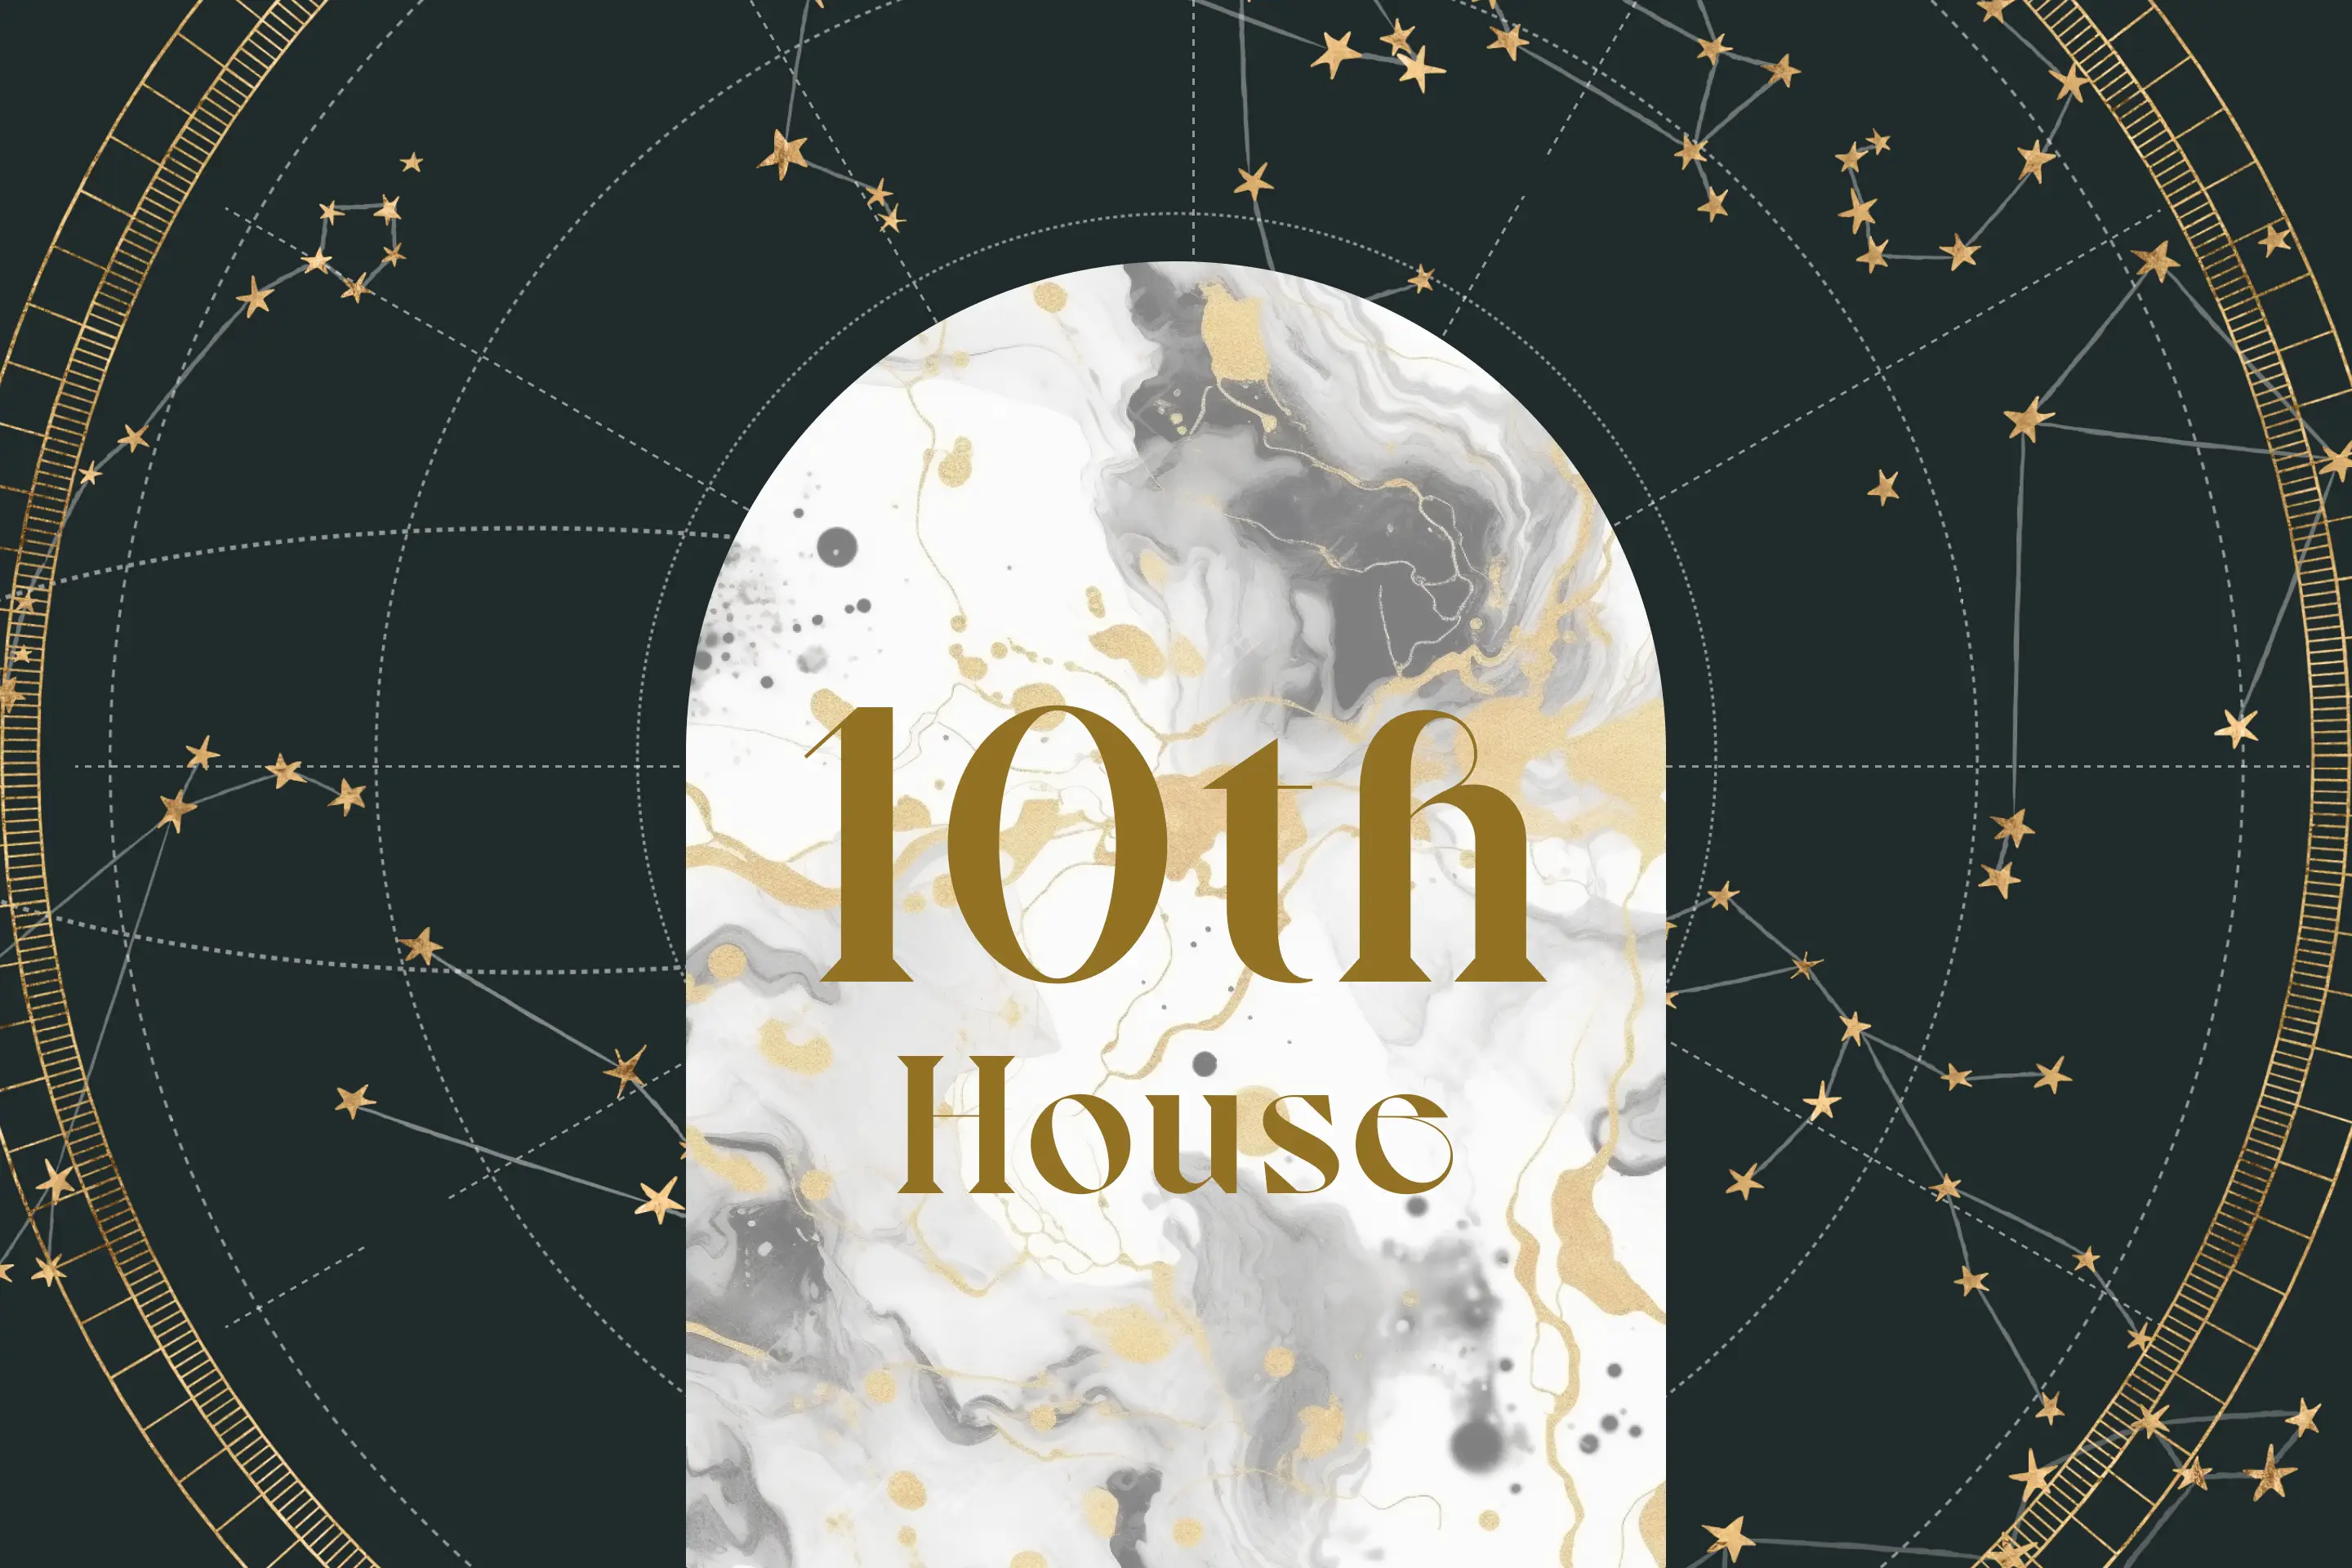 Tenth House in Astrology